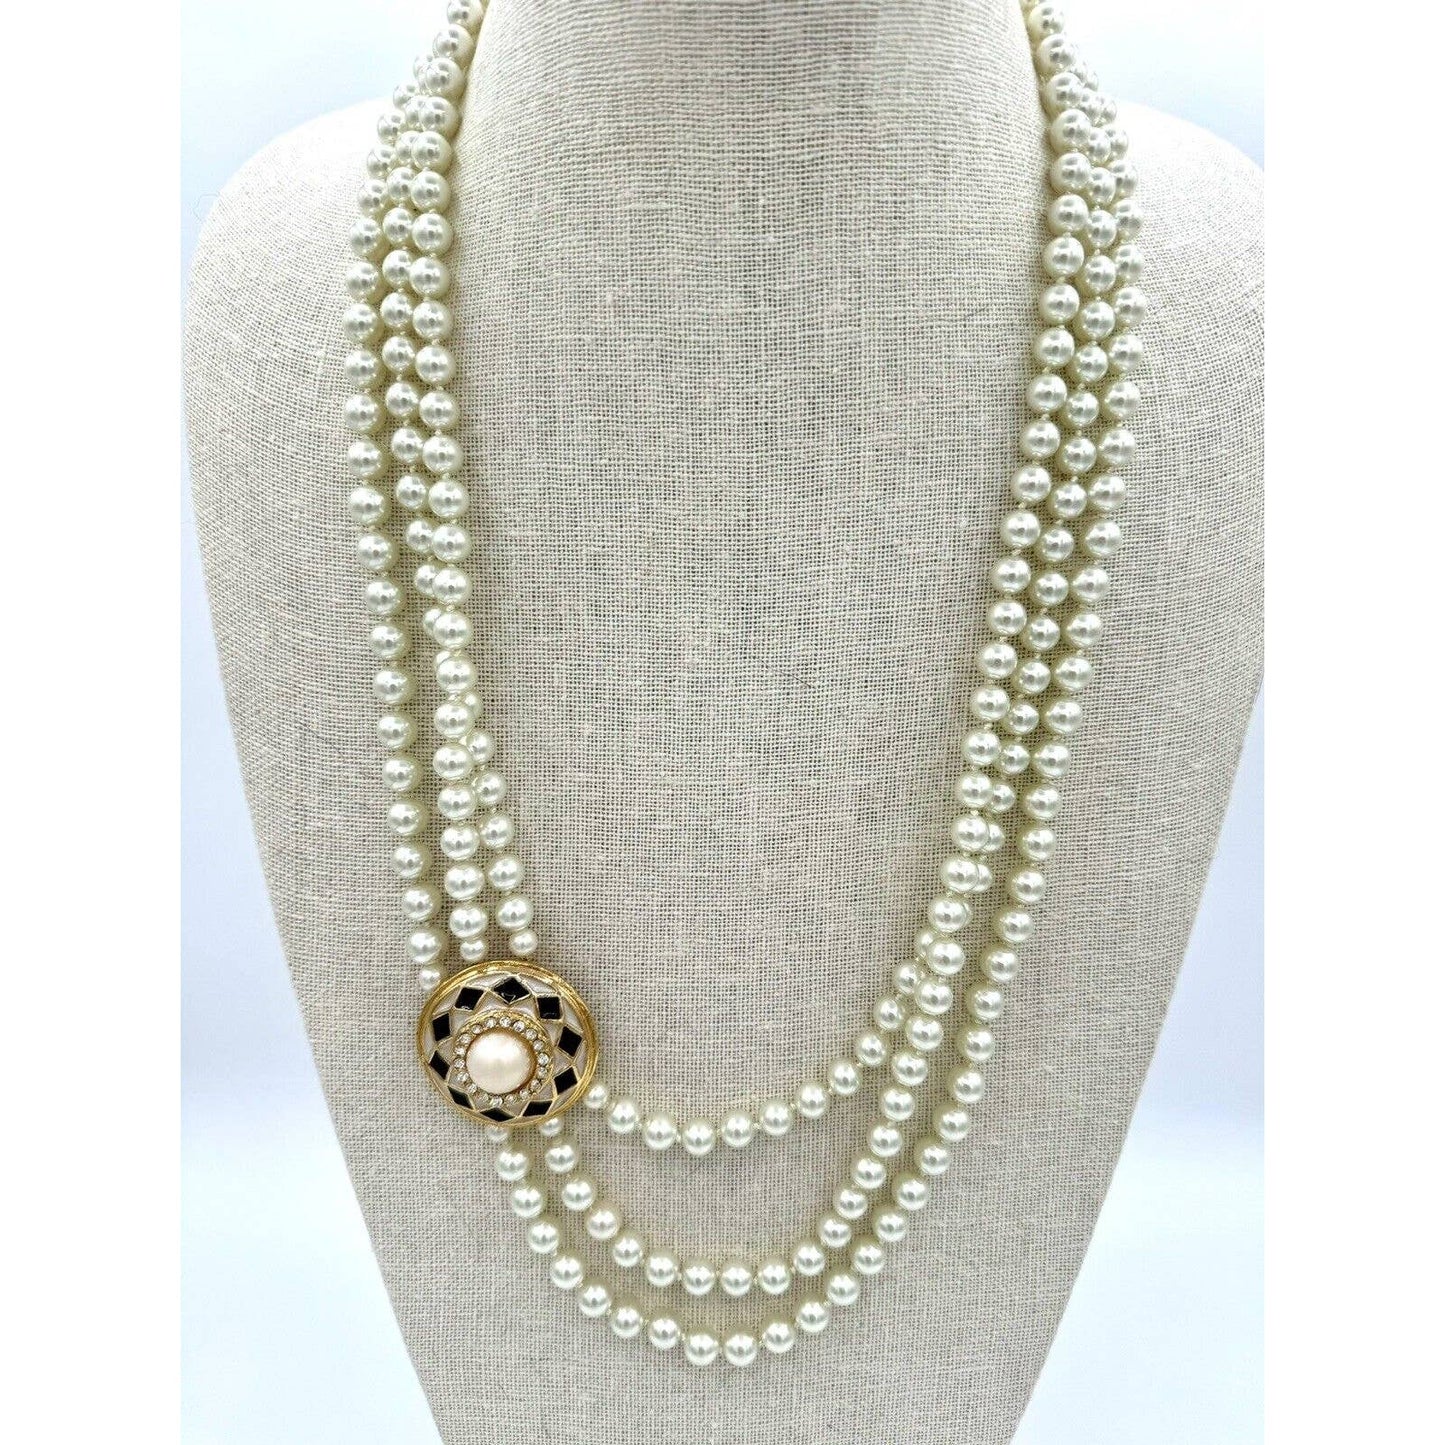 PearlVintage Triple Strand Glass Pearl Statement Necklace W/ Off Center Focal Bead - Black Dog Vintage